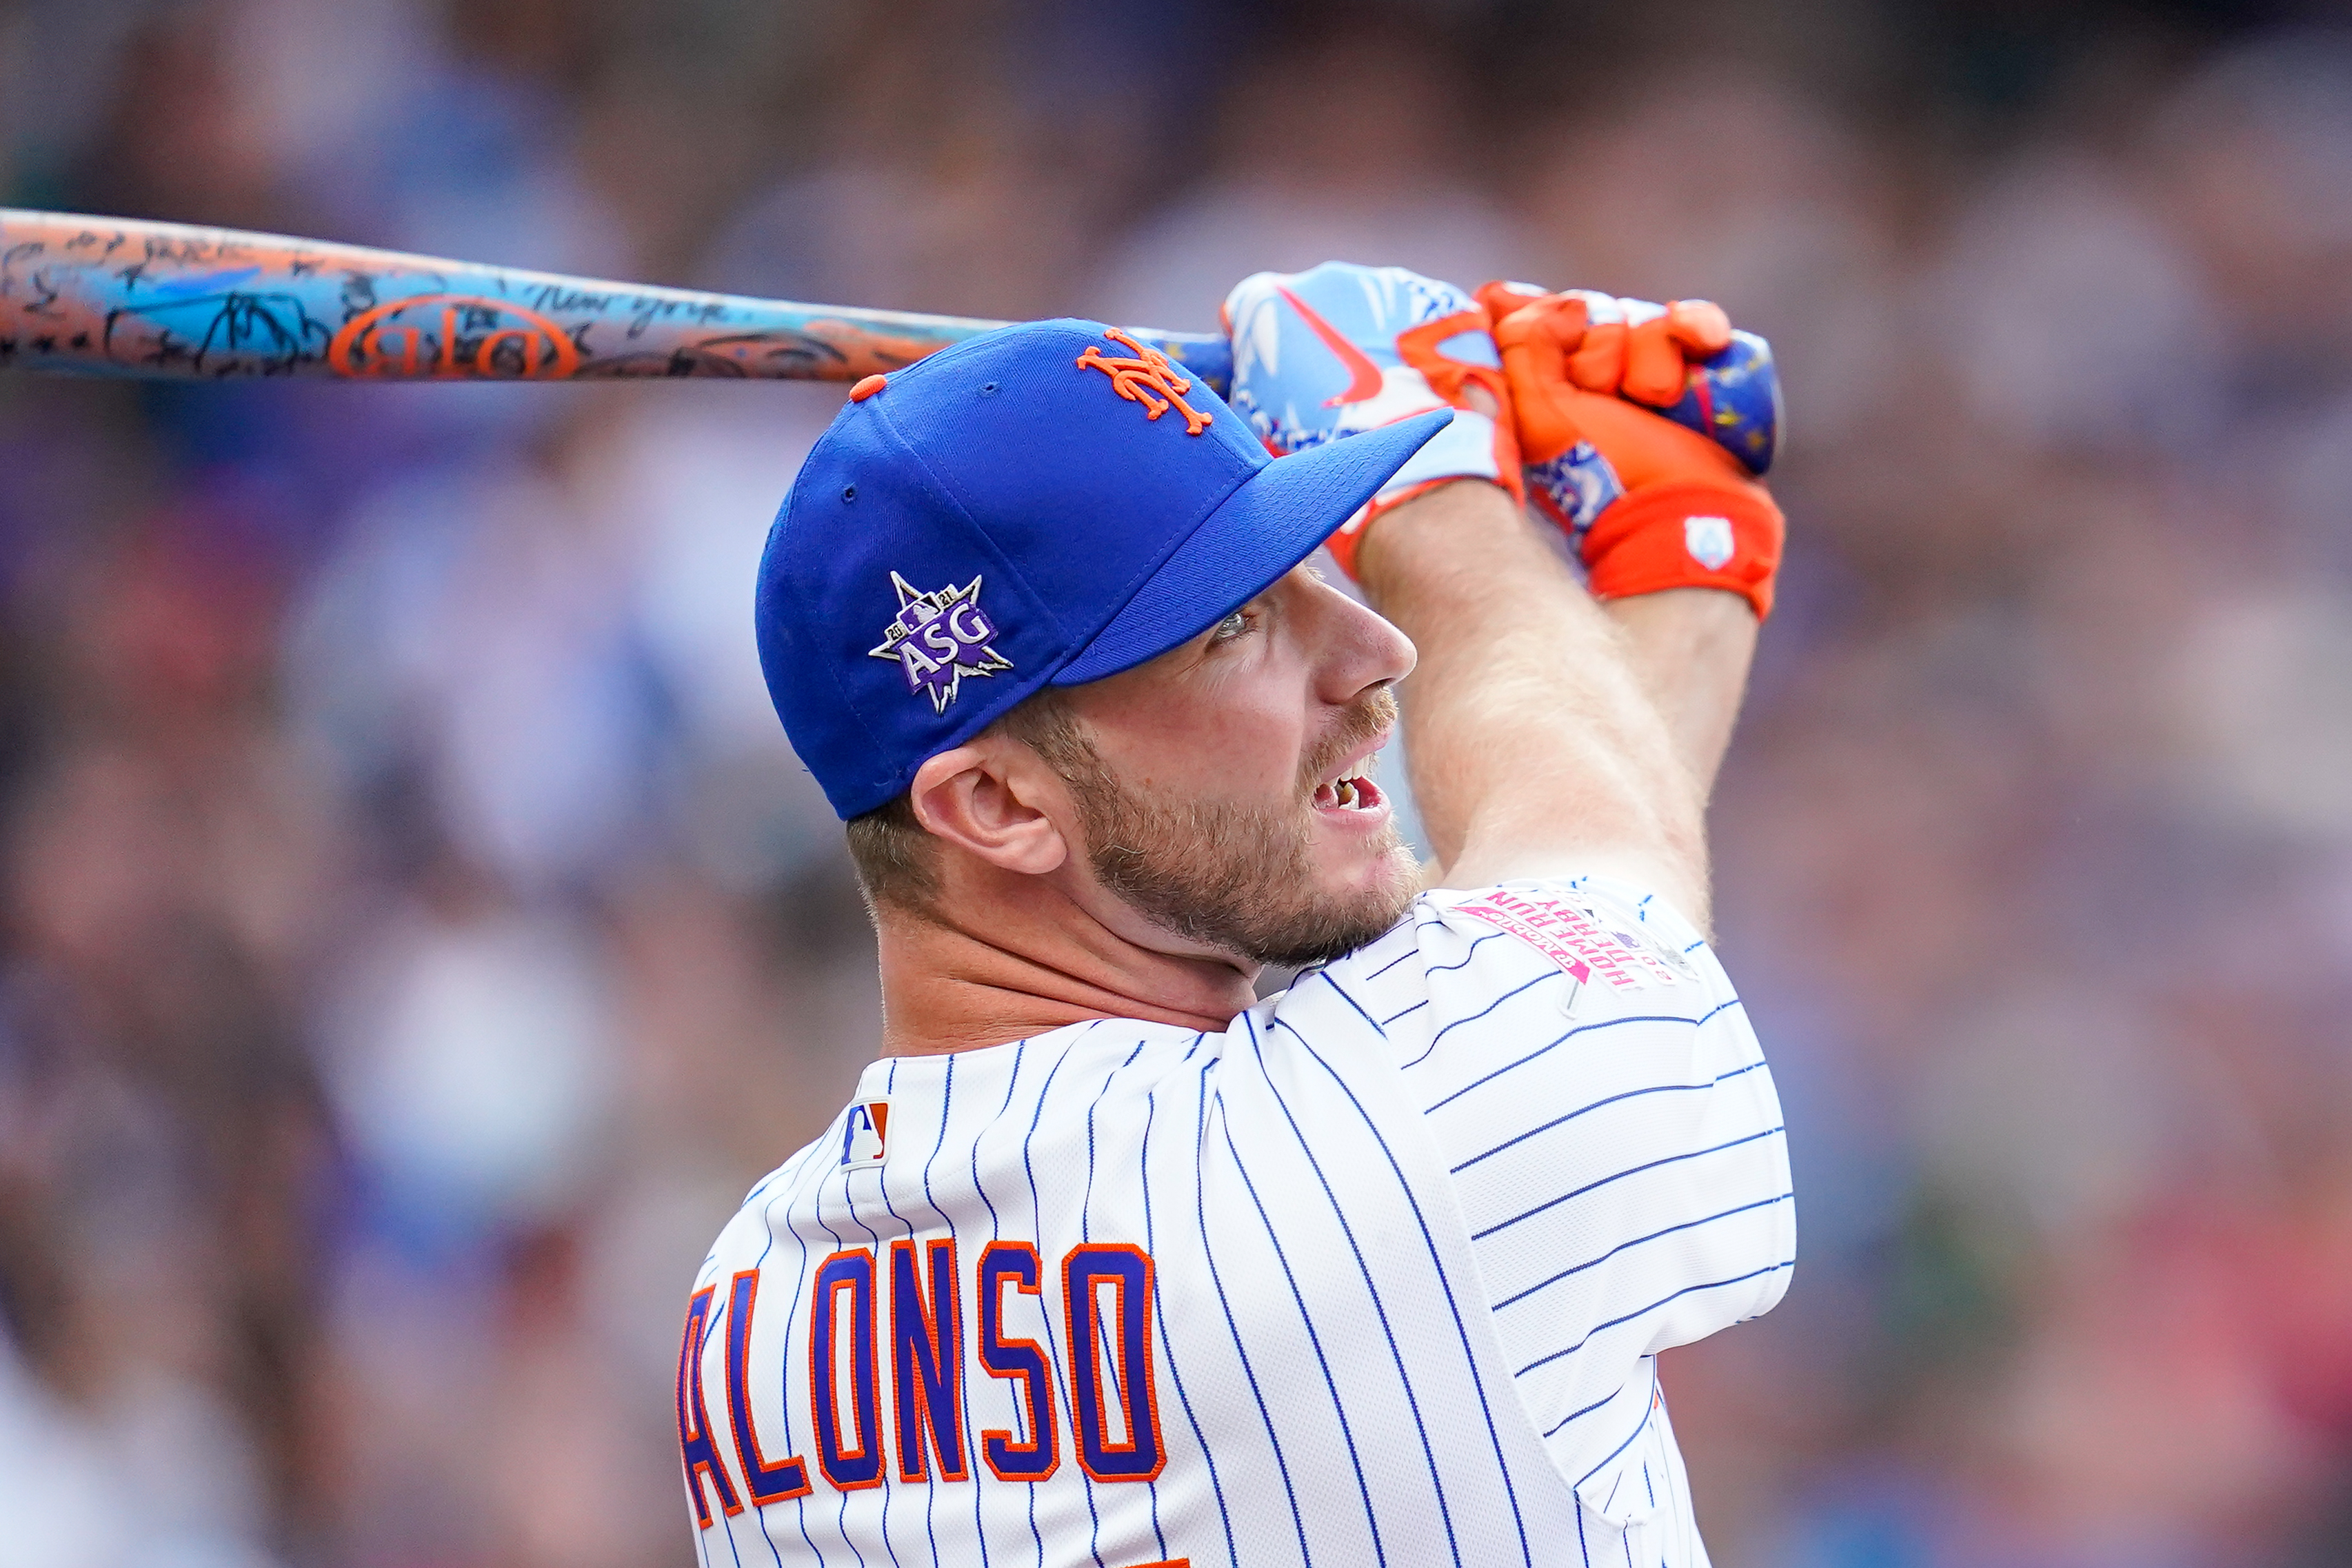 pete alonso home run derby 2019